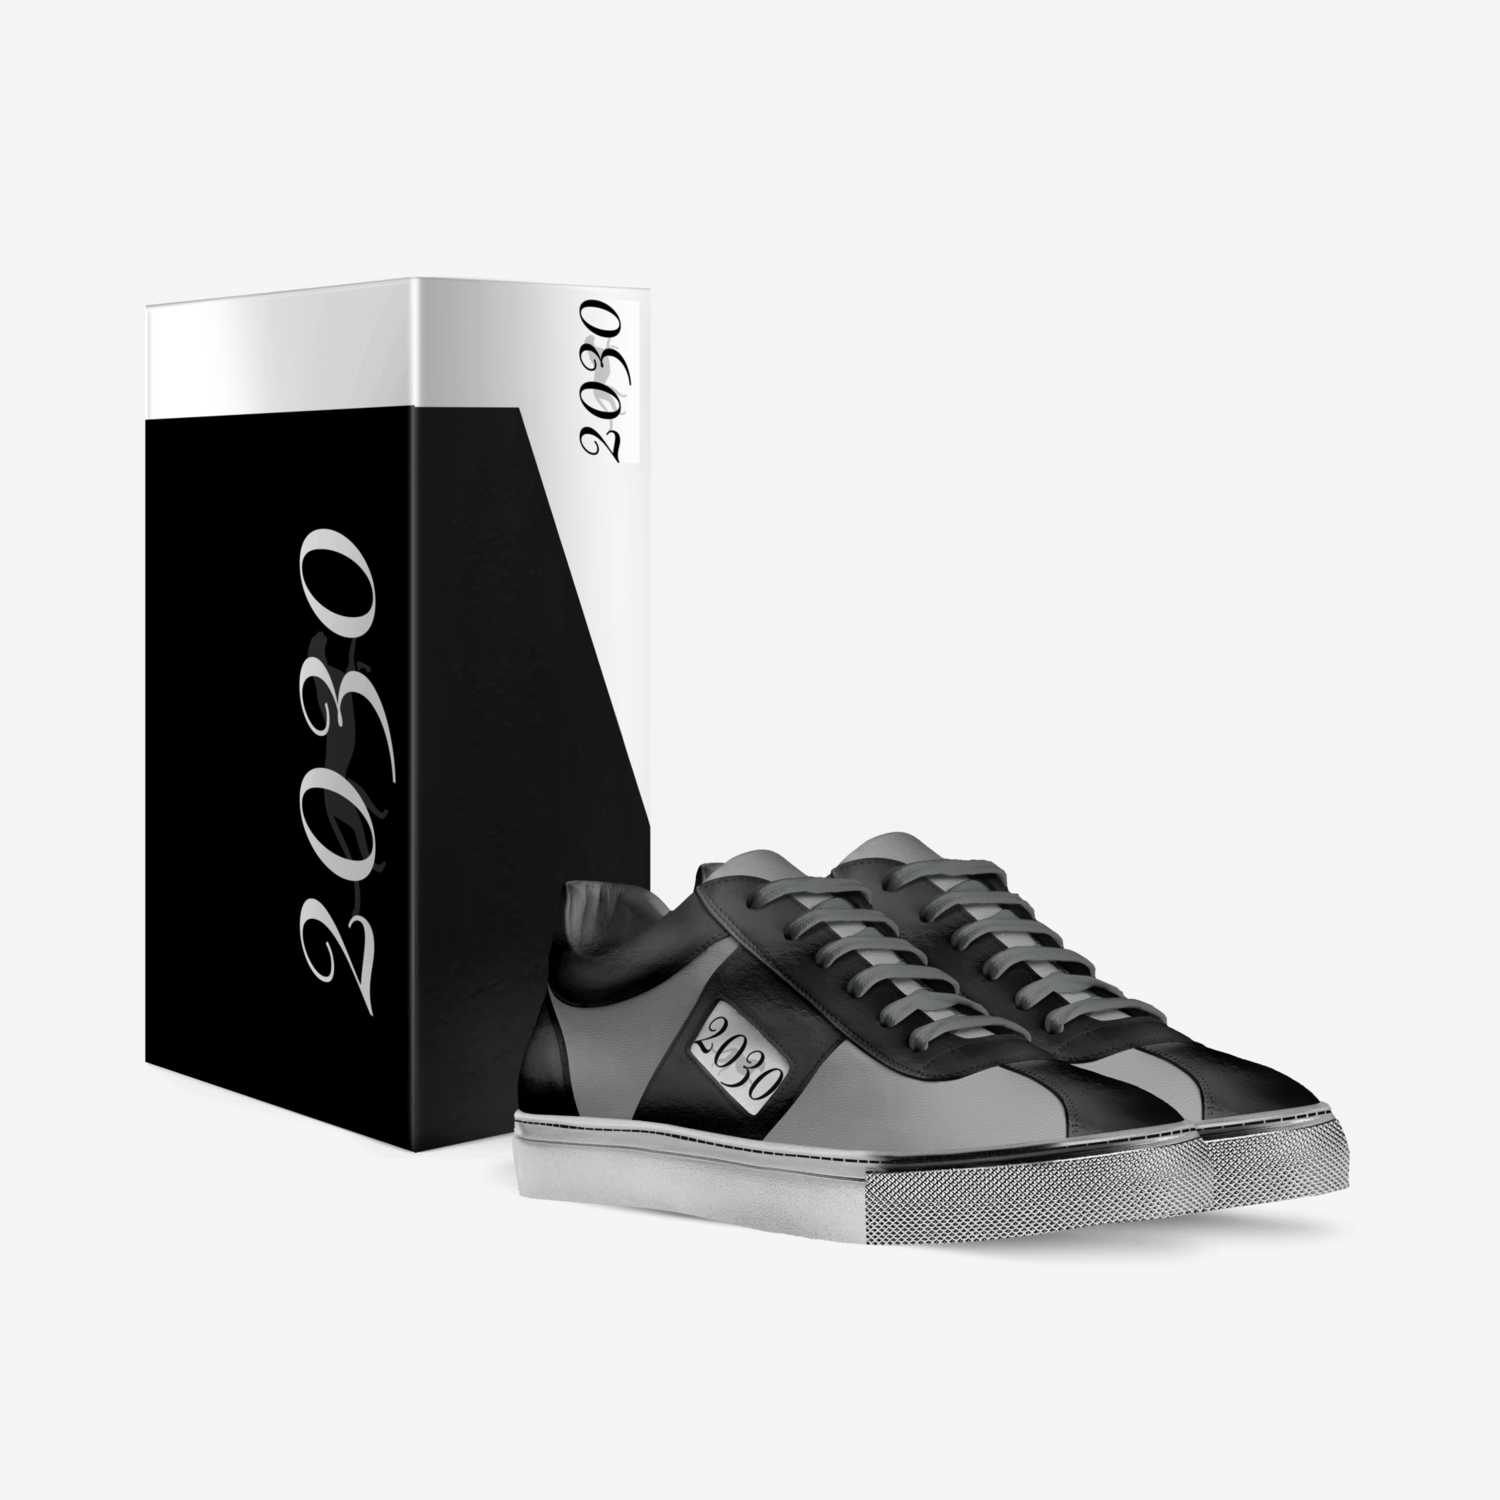 2030 custom made in Italy shoes by Tongie Davis | Box view